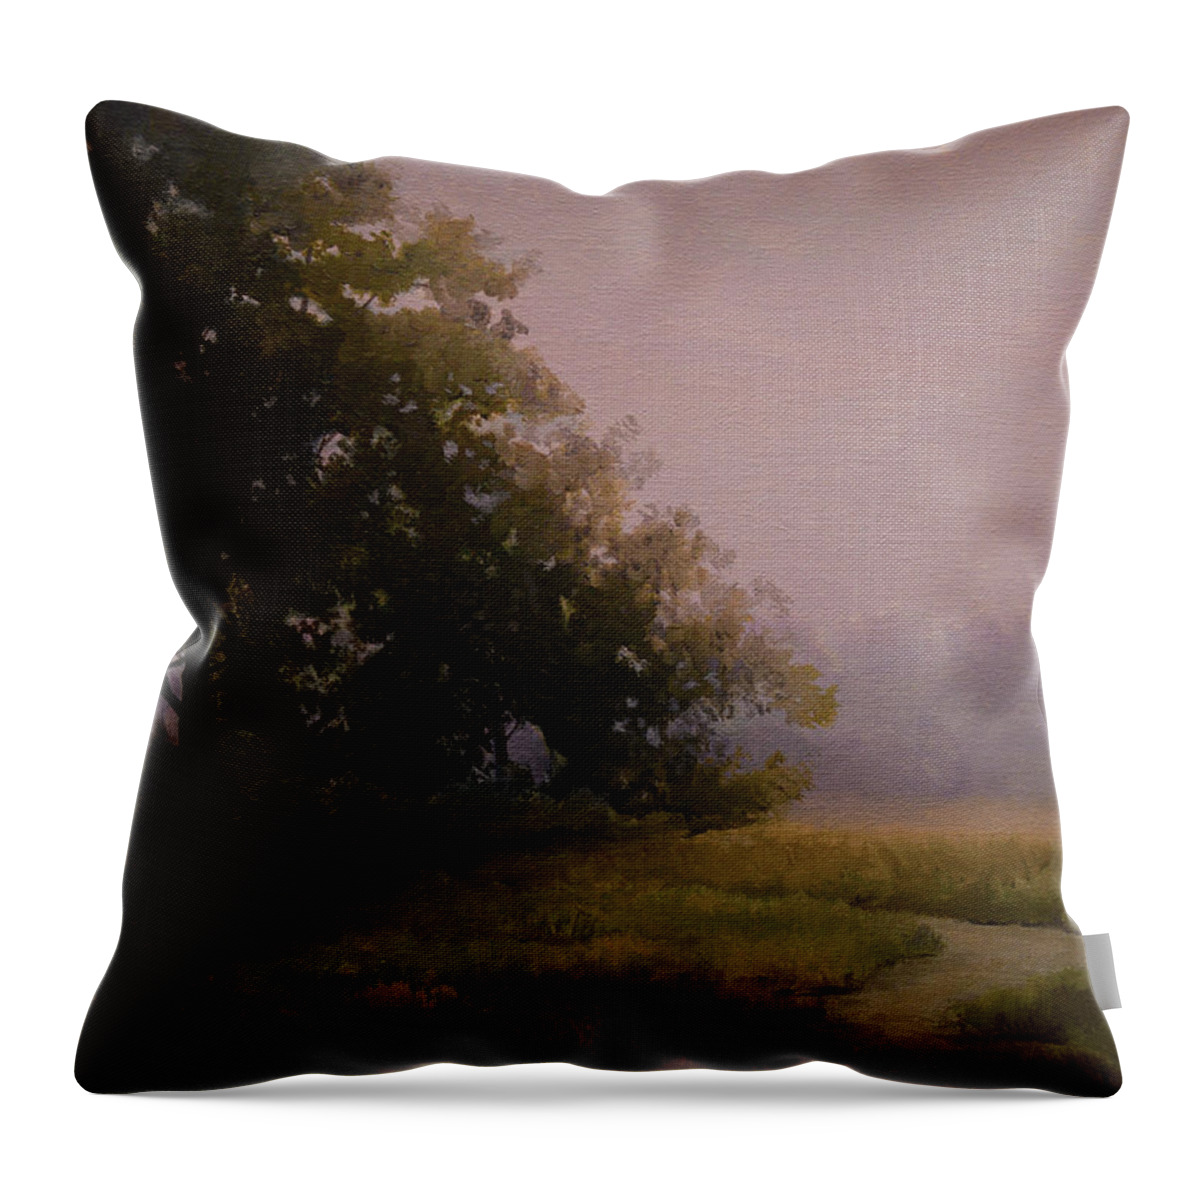 Fog Throw Pillow featuring the painting Foggy Morning, Oak Openings by Charles Owens